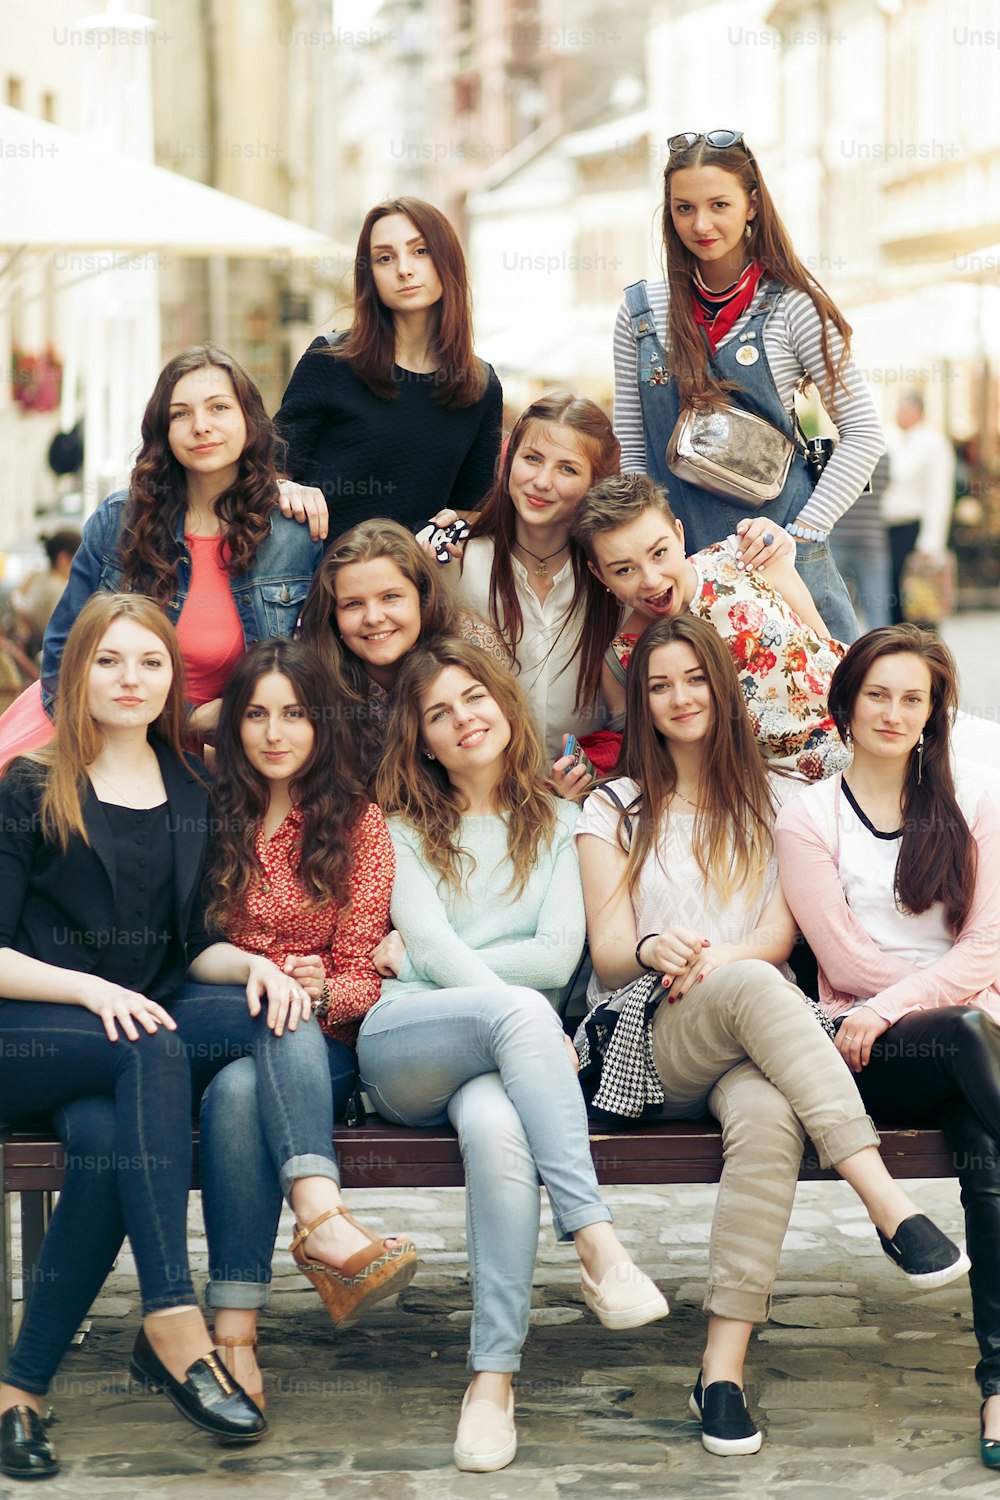 stylish happy women hipsters fashionable dressed smiling and sitting on bench in europe city street, joyful moments friendship concept